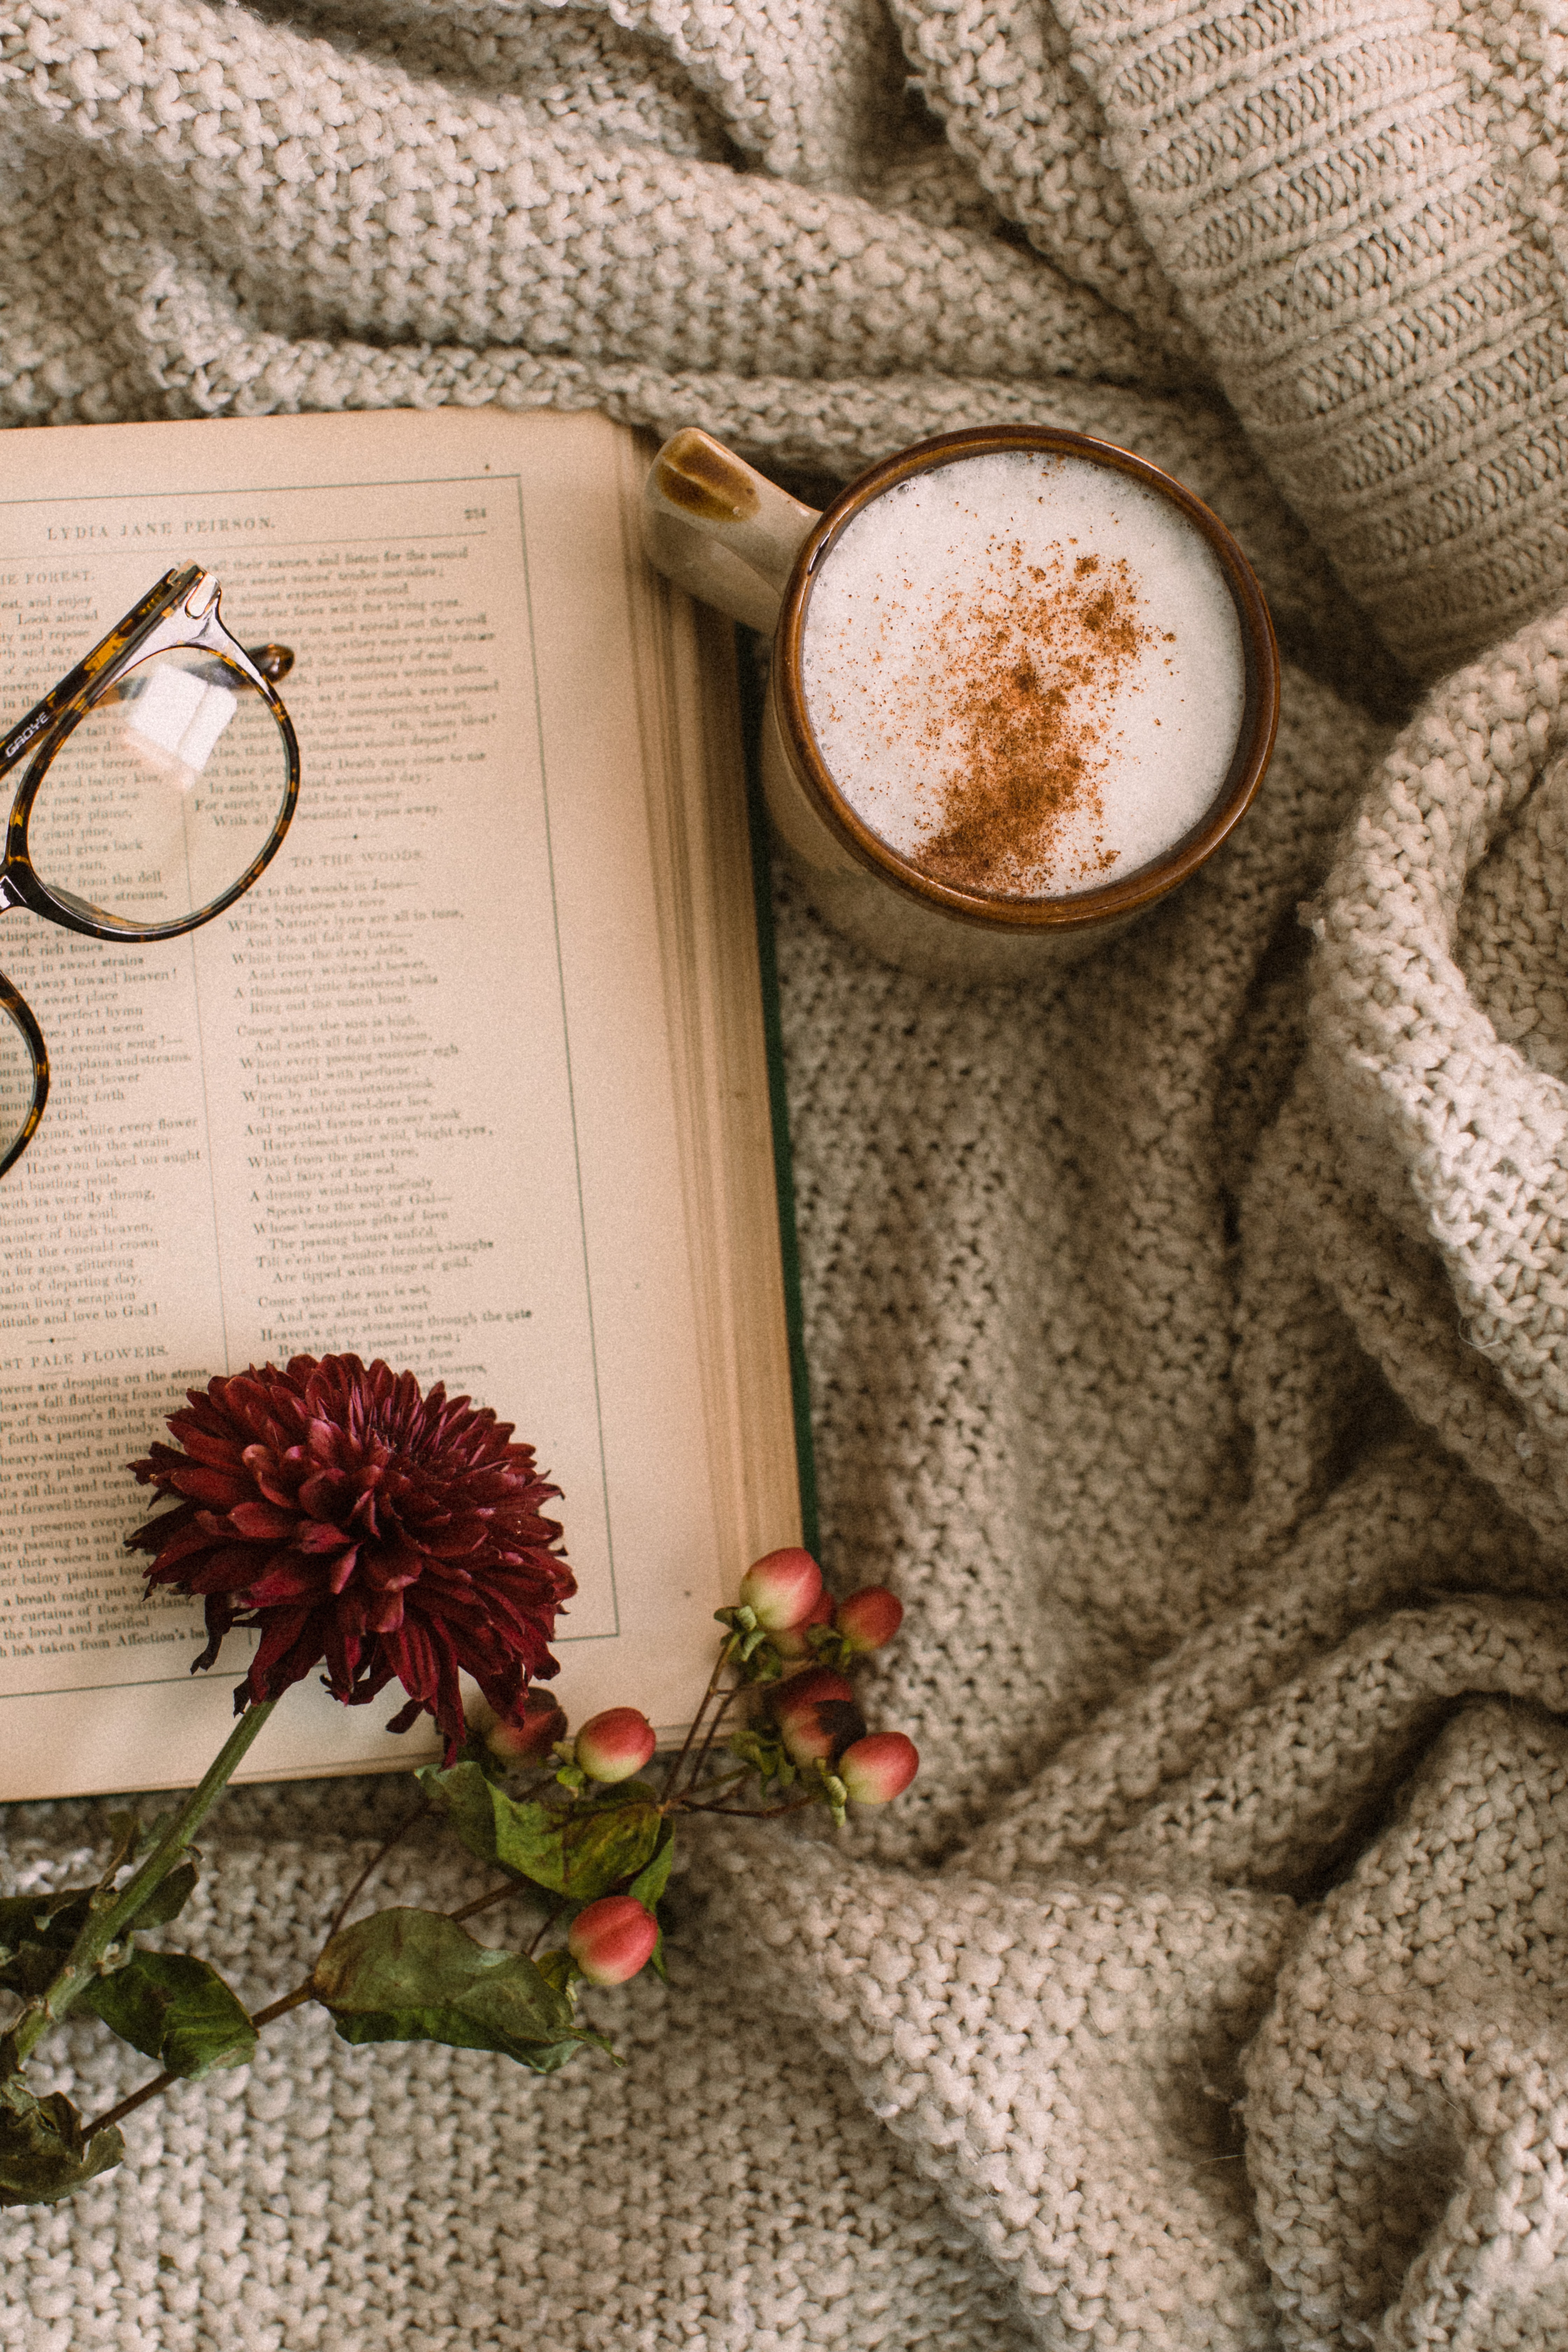 book, cup, food, spectacles, flowers, coffee, cappuccino, glasses, mug